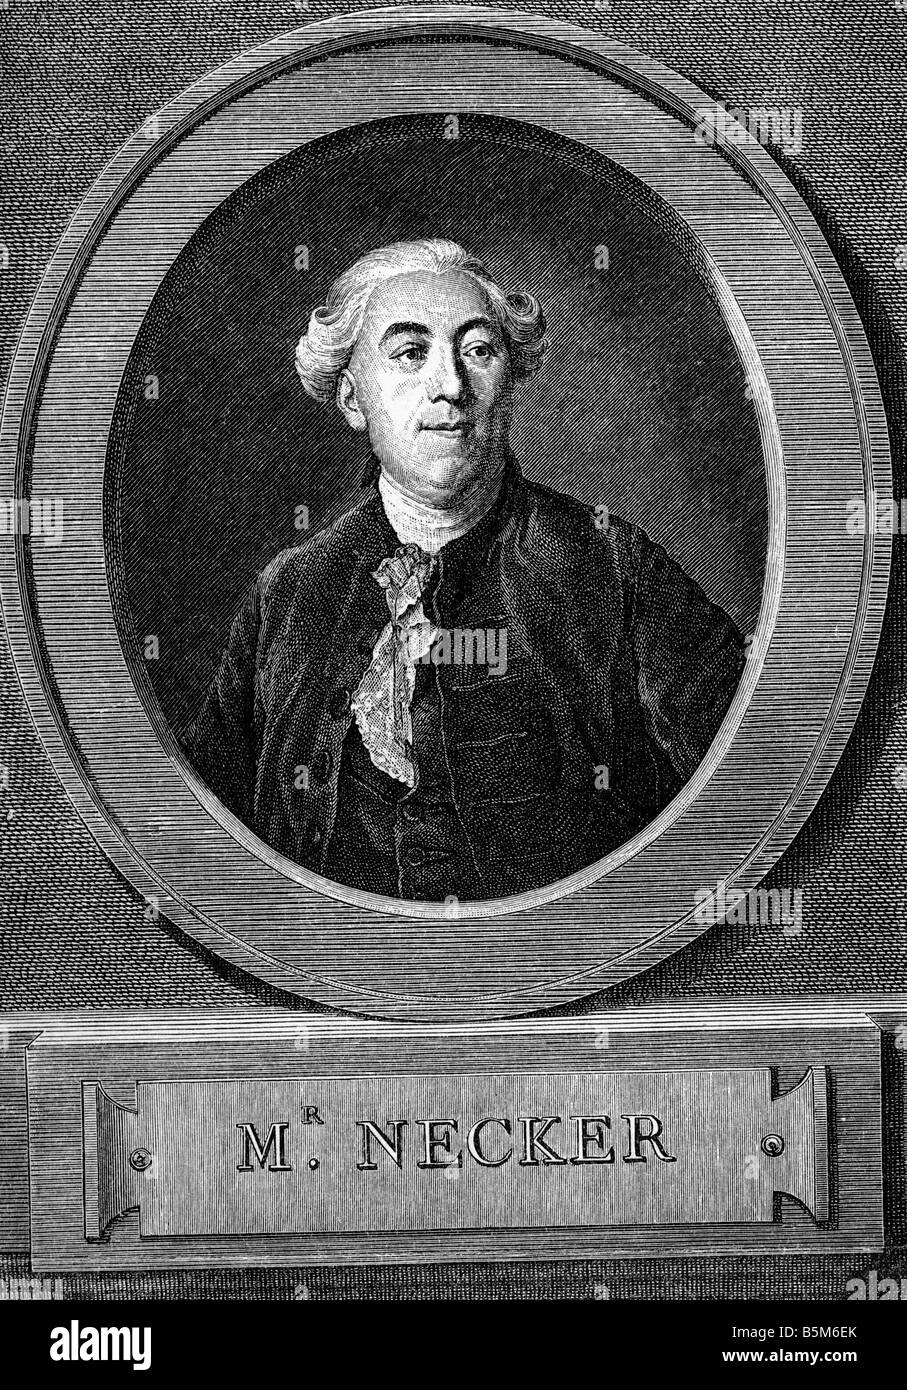 Necker, Jacques, 30.9.1732 - 9.4.1804, French banker and politician, portrait, copper engraving Augustin de Saint-Aubin after painting by oseph Duplessis, circa 1780, , Artist's Copyright has not to be cleared Stock Photo